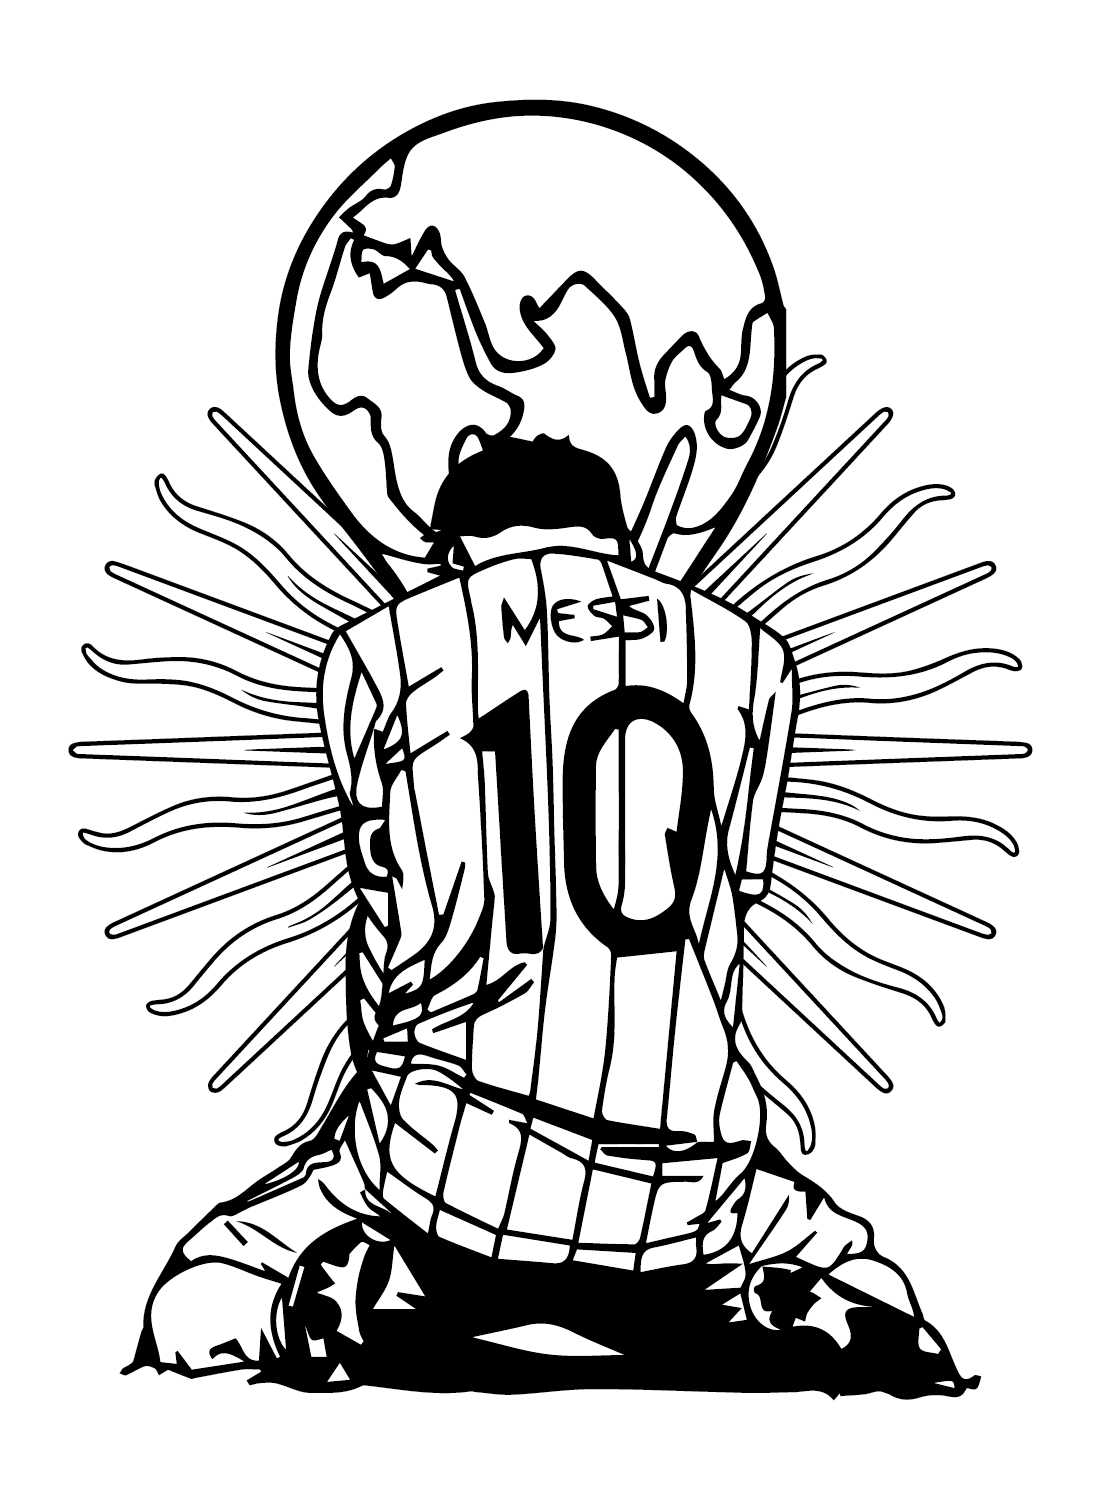 Messi to Print Coloring Page